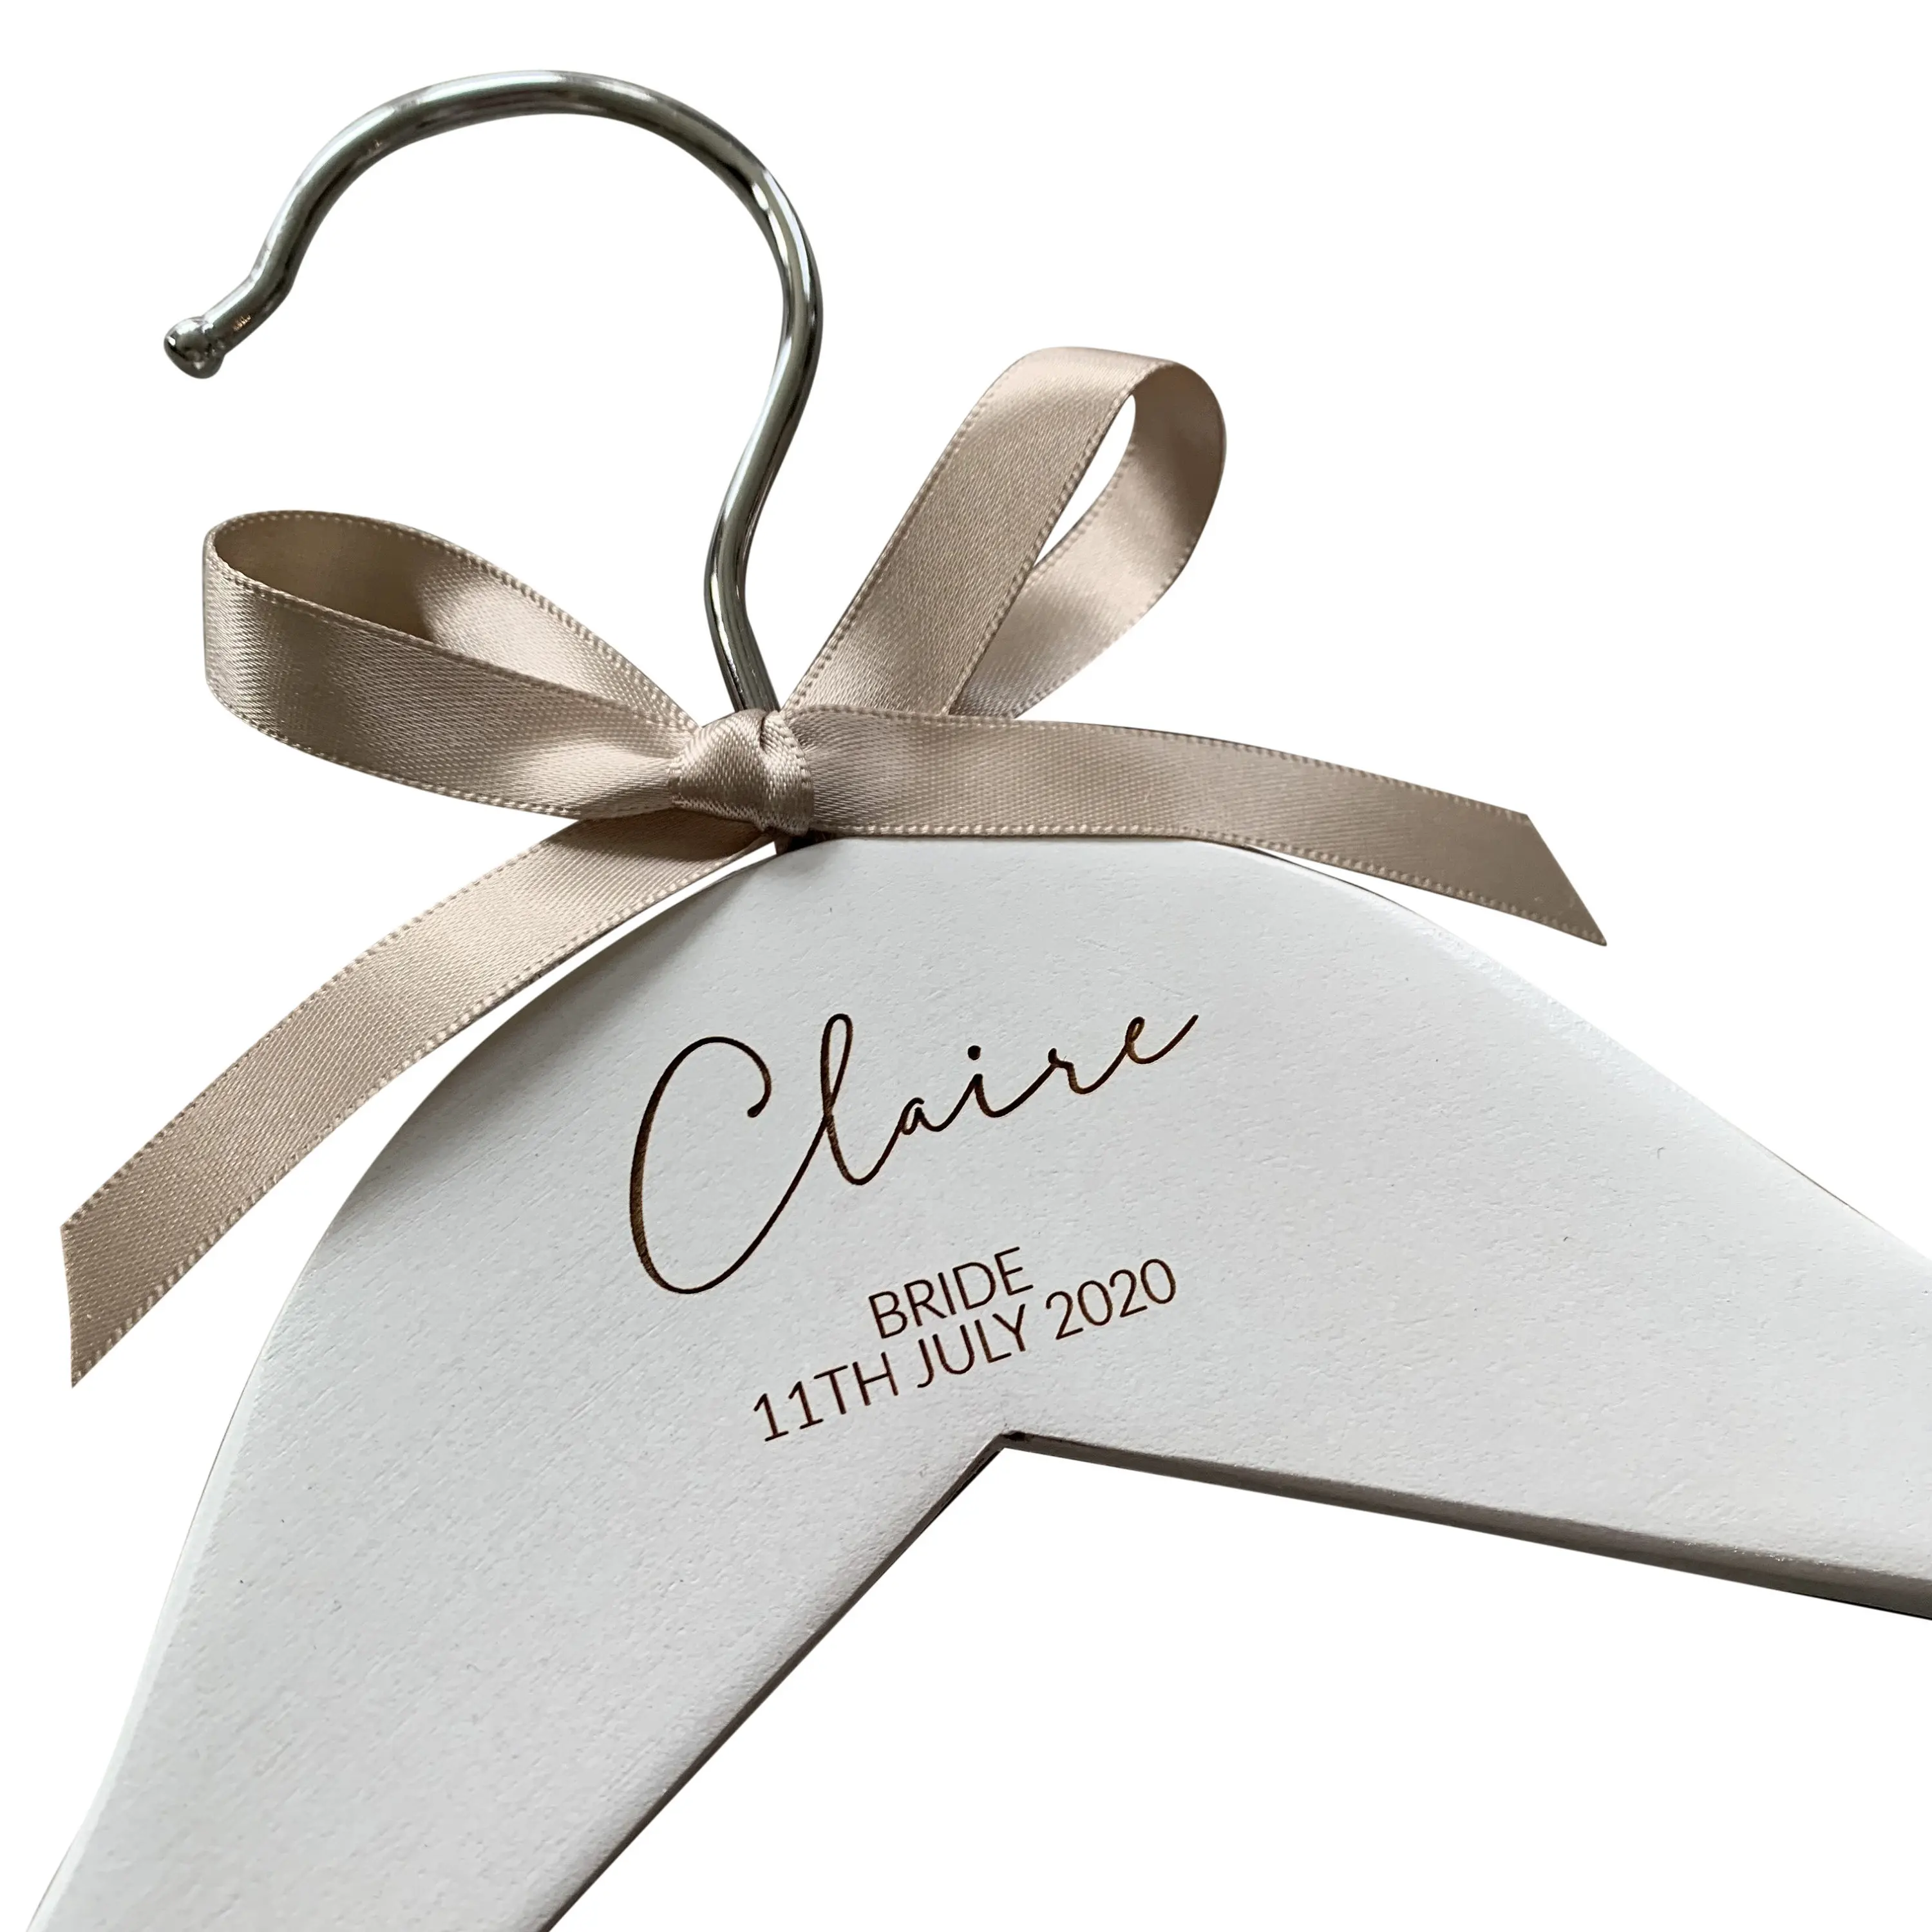 PERSONALISED ENGRAVED COAT HANGER 110724 WEDDDING PROM PARTY FAVOUR THANK YOU 